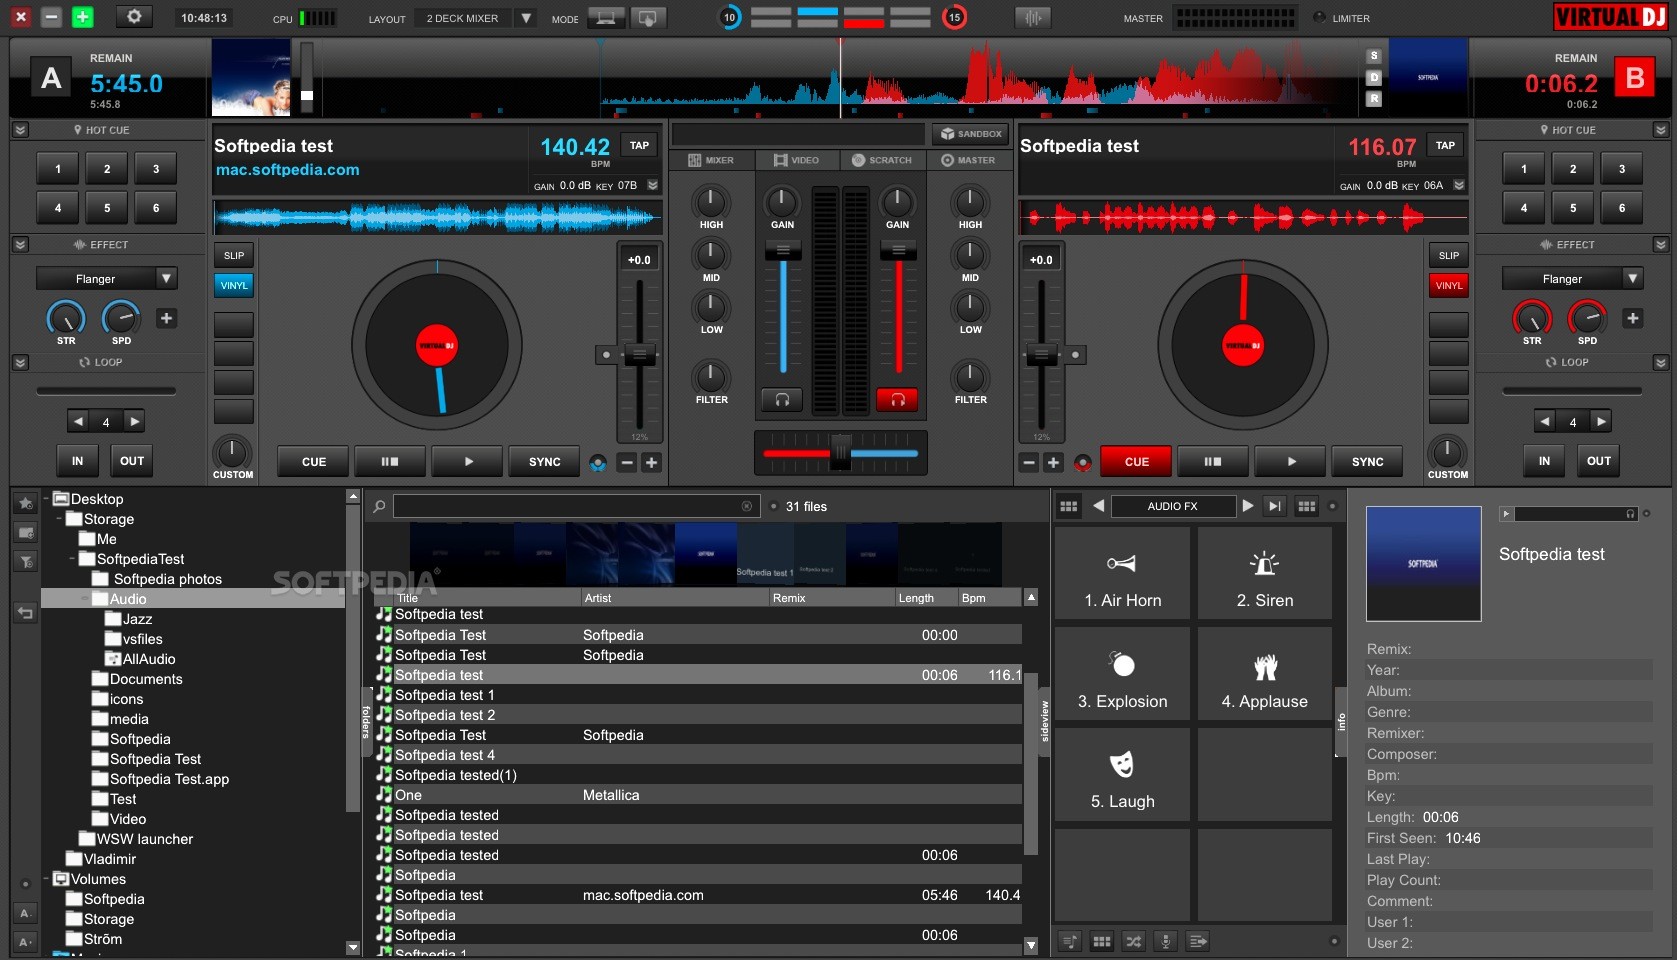 Download virtual dj 8 sound effects pack